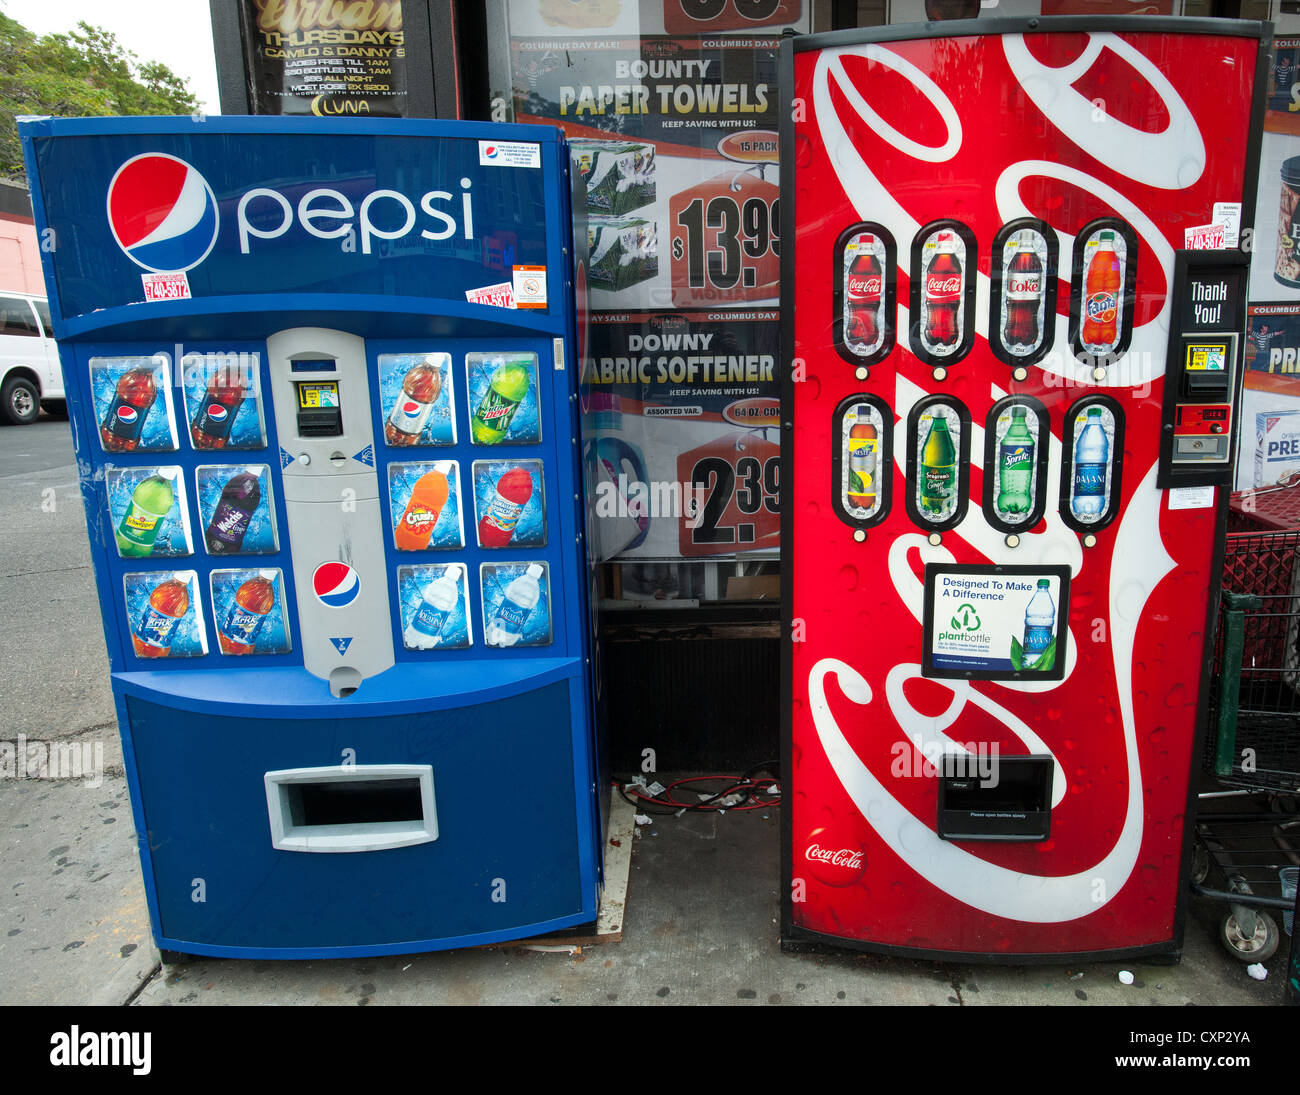 Pepsi-Cola and Coca-Cola vending machines side by side Stock Photo